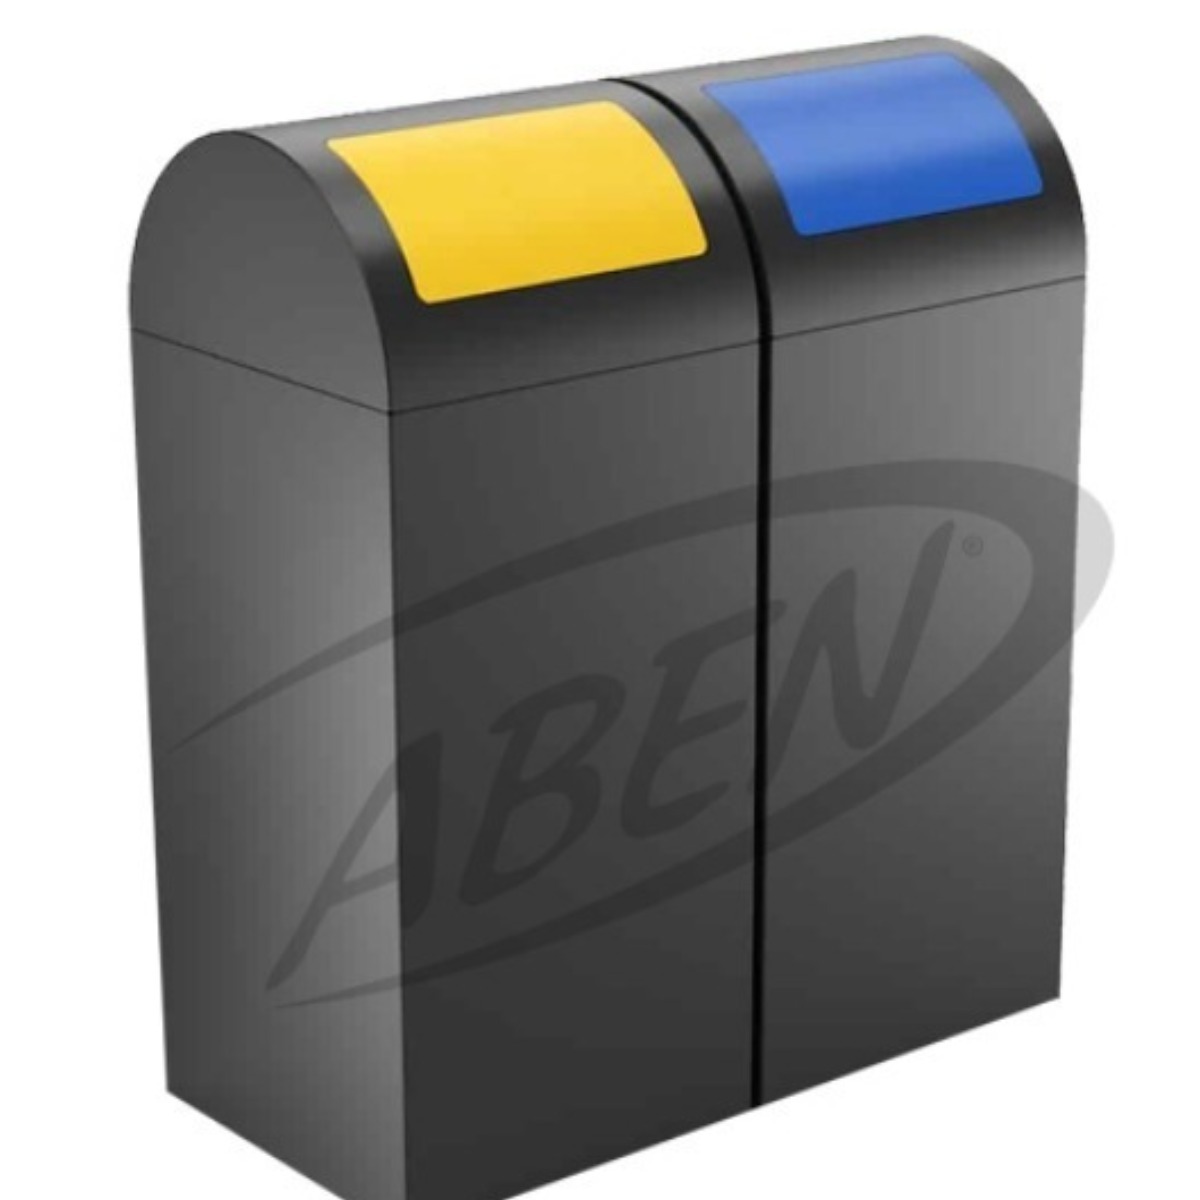 AB-763 2’Part Recycle Bin